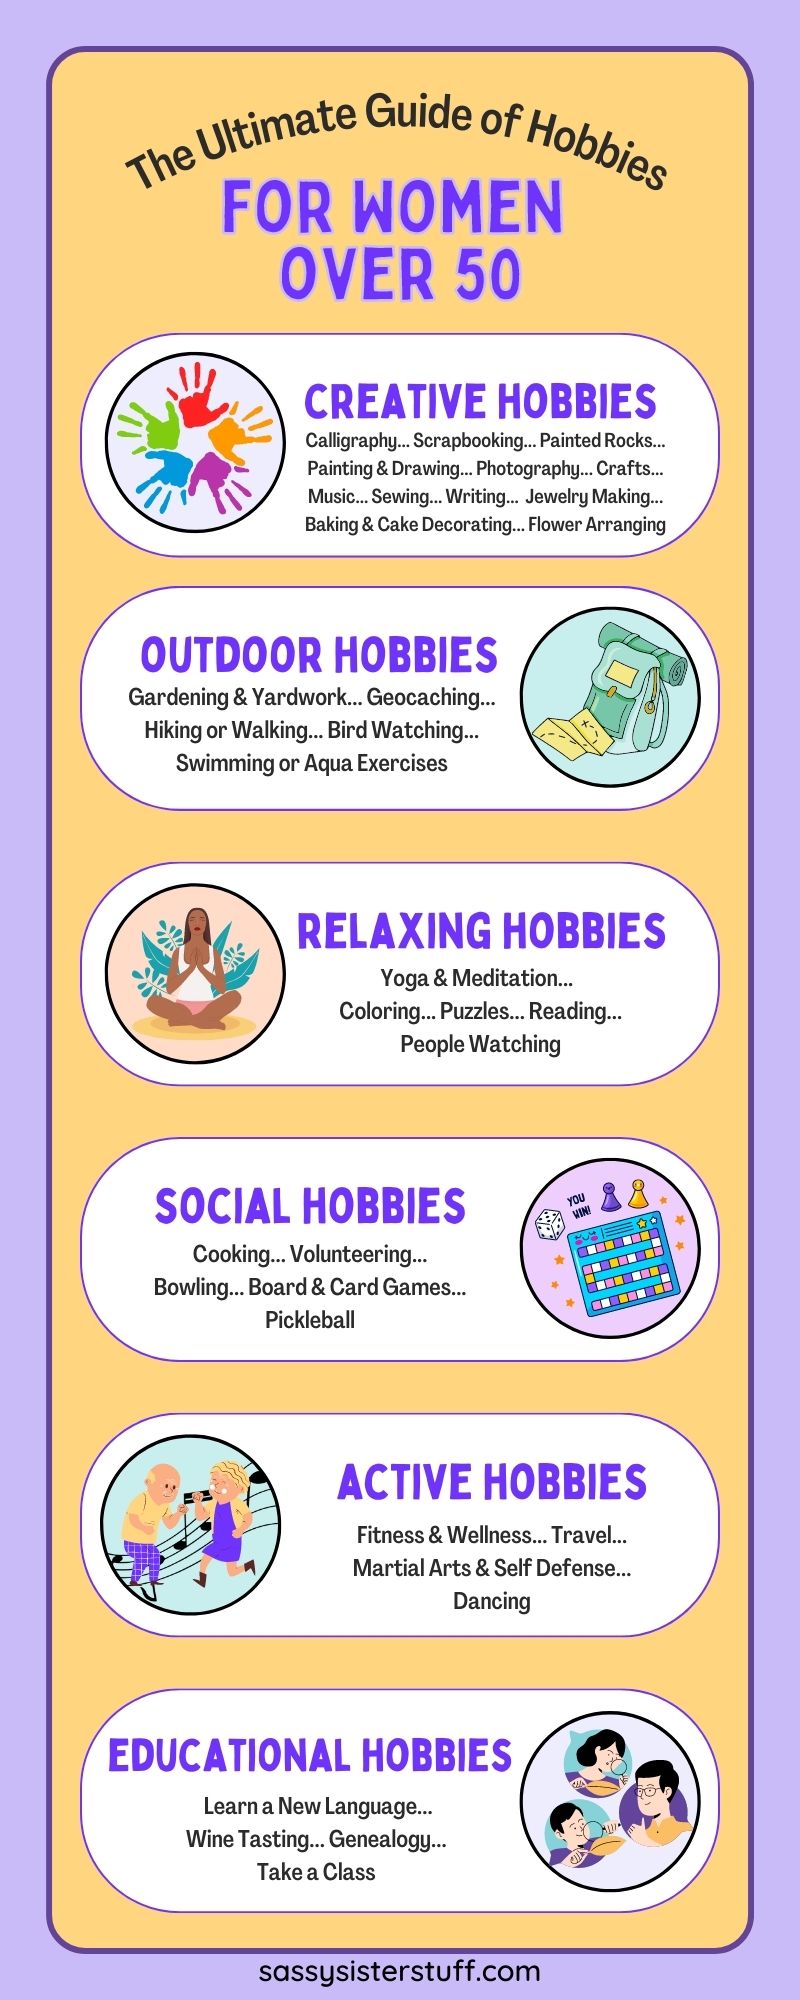 Hobbies for Women: 120+ Hobby Ideas for the New Year